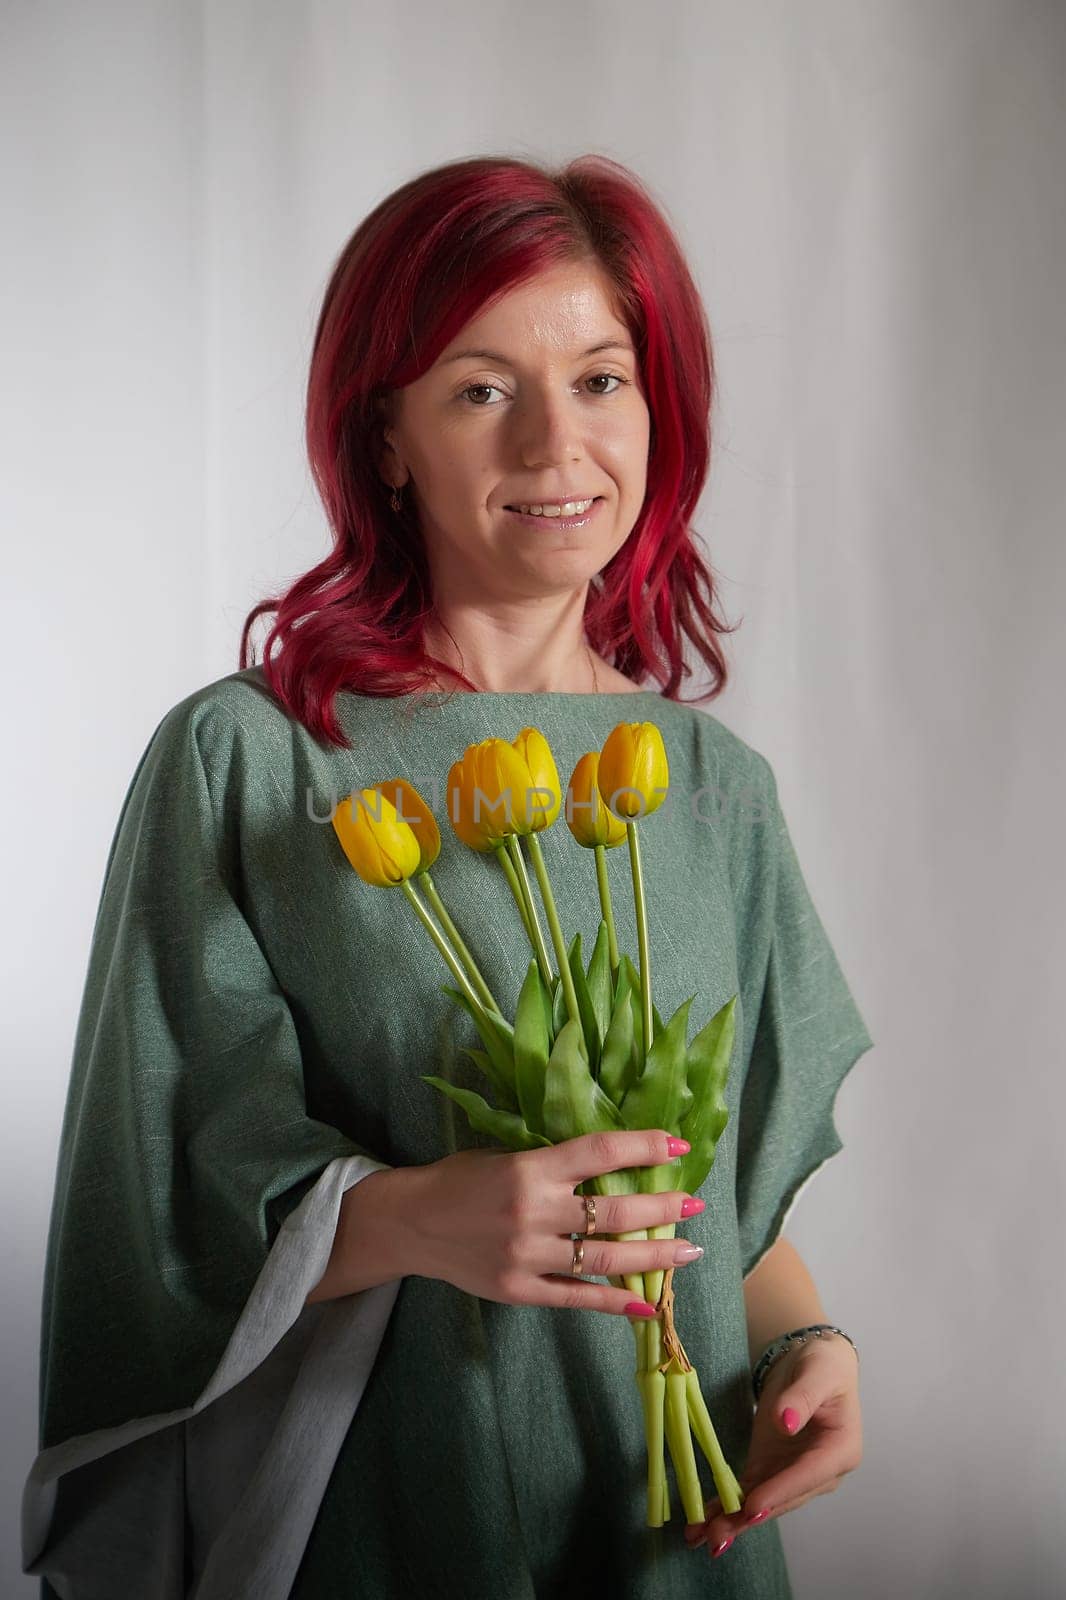 Beautiful woman with red hair in yellow dress on a light background holds tulips. Inernational woman's day 8 March by keleny